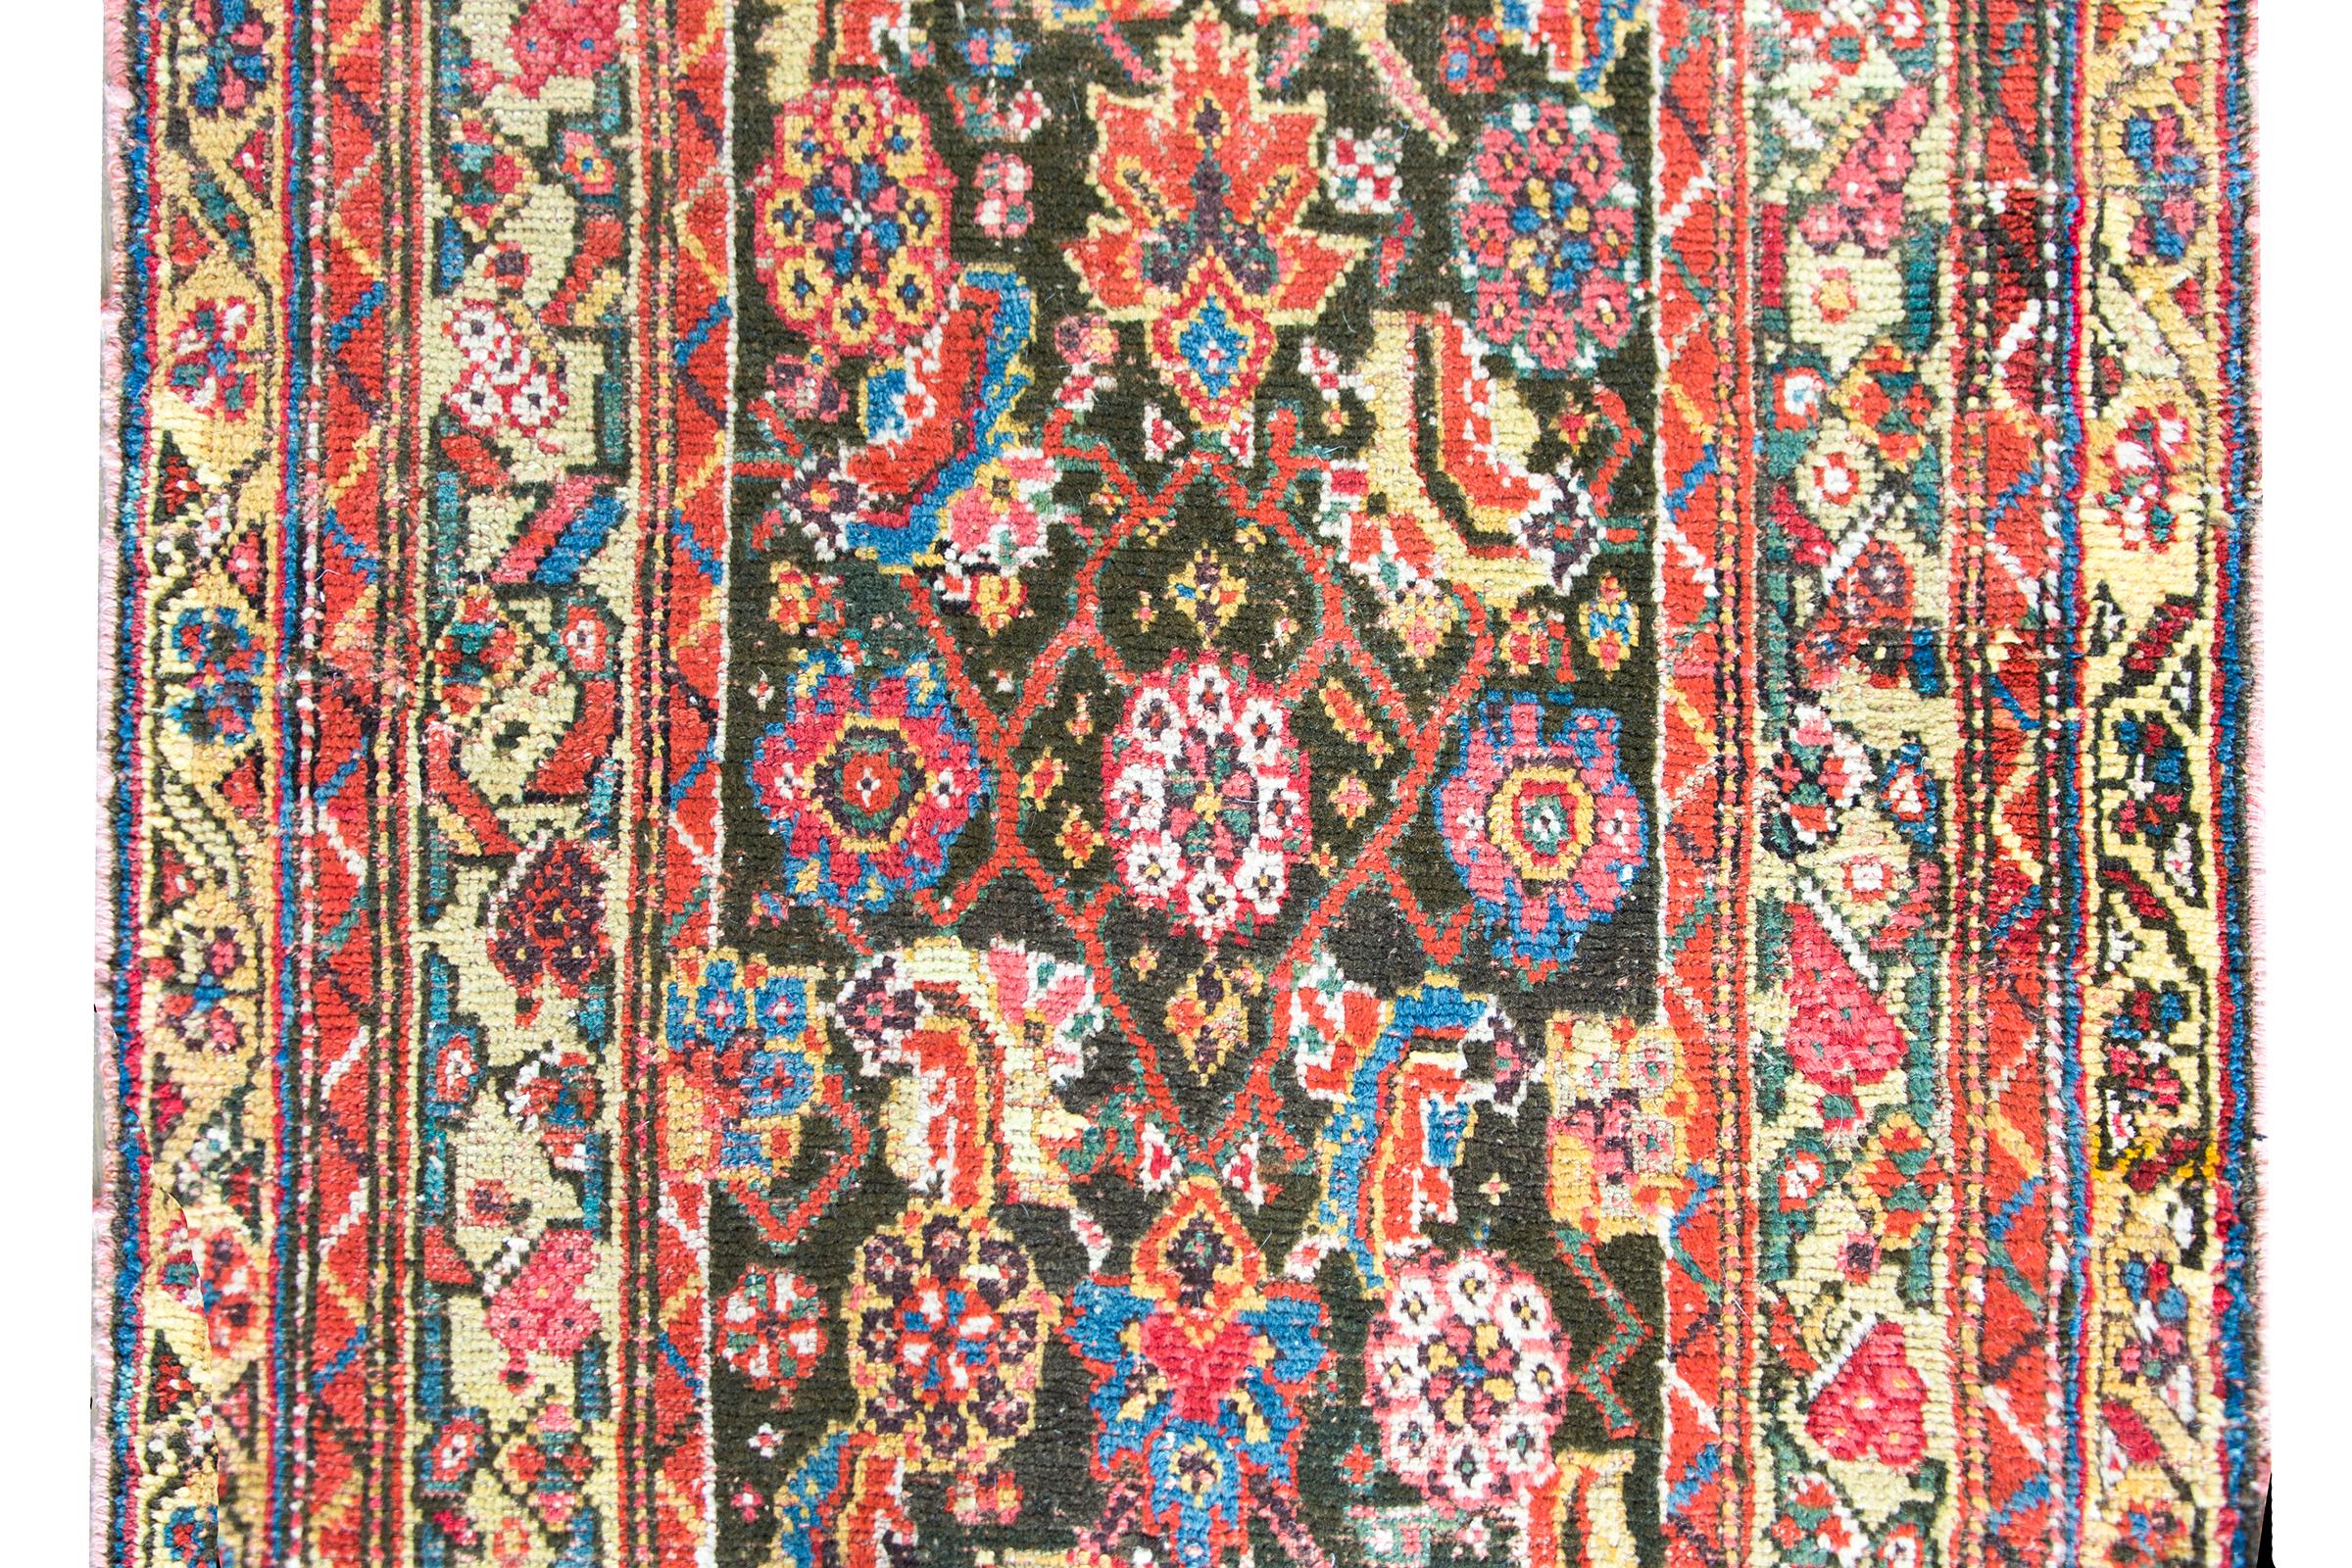 A wonderful early 20th century Persian Kurdish rug with an all-over floral trellis pattern with large flowers and leaves woven in myriad colors including crimson, indigo, gold, pink and green, and all surrounded by a complex border with several